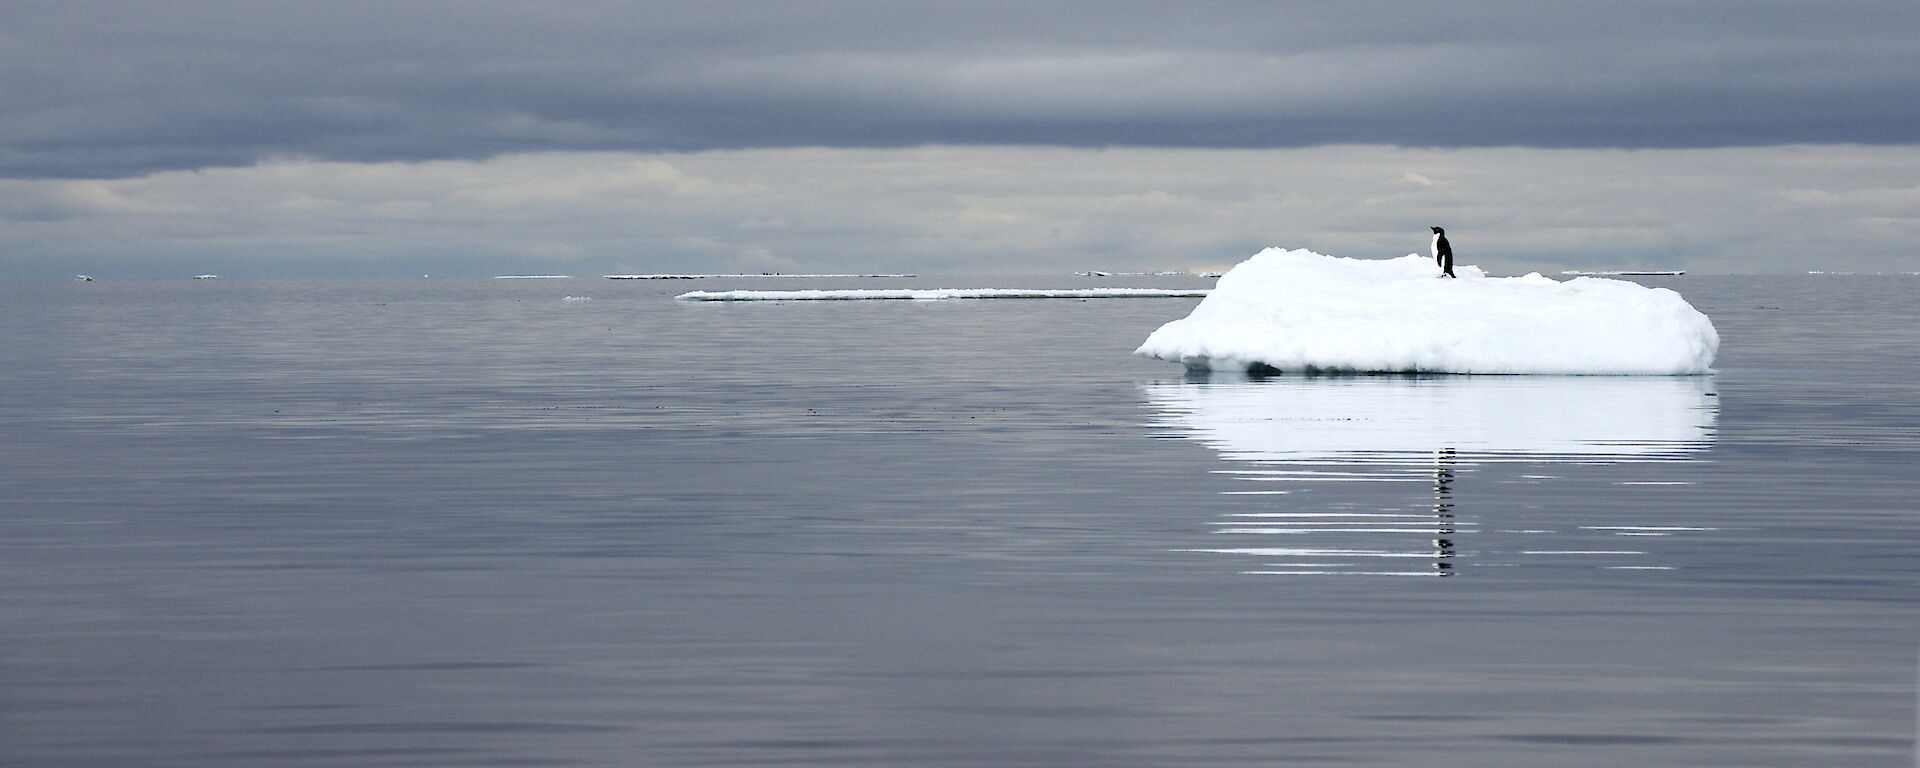 An Adelie penguin on a small iceberg, surrounded by water.